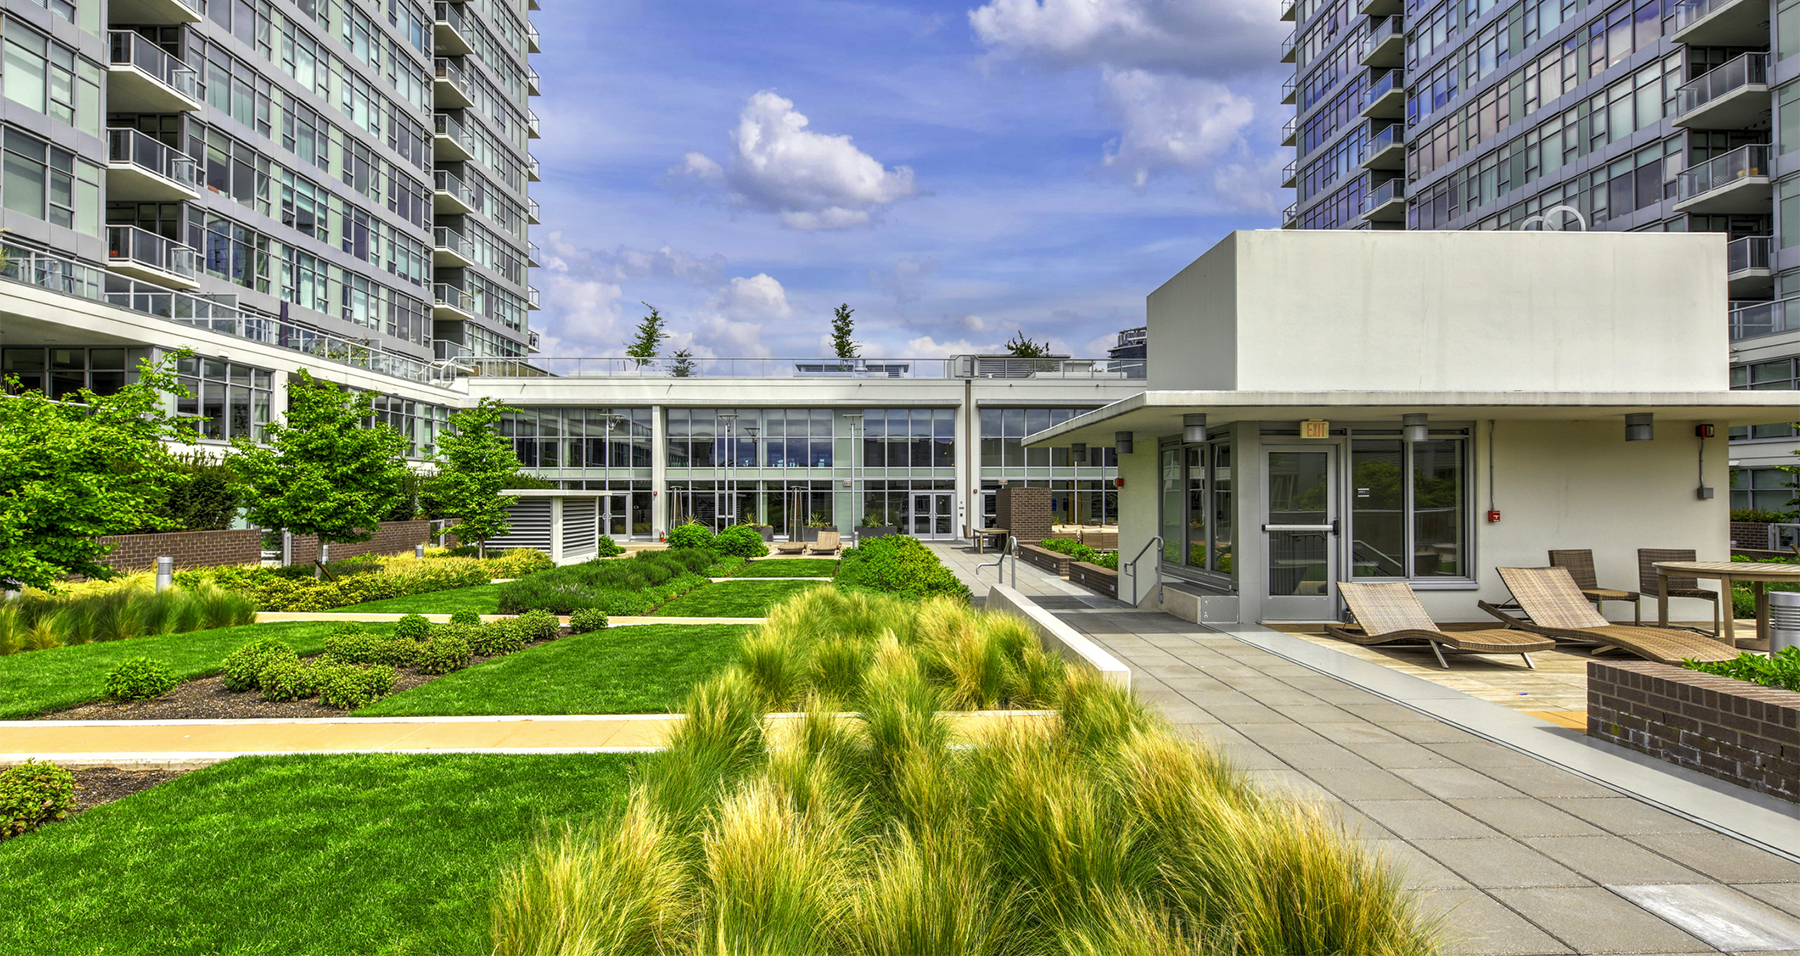 Million Dollar Curb Appeal: How to Create Imaginative Outdoor Spaces for your Tenants